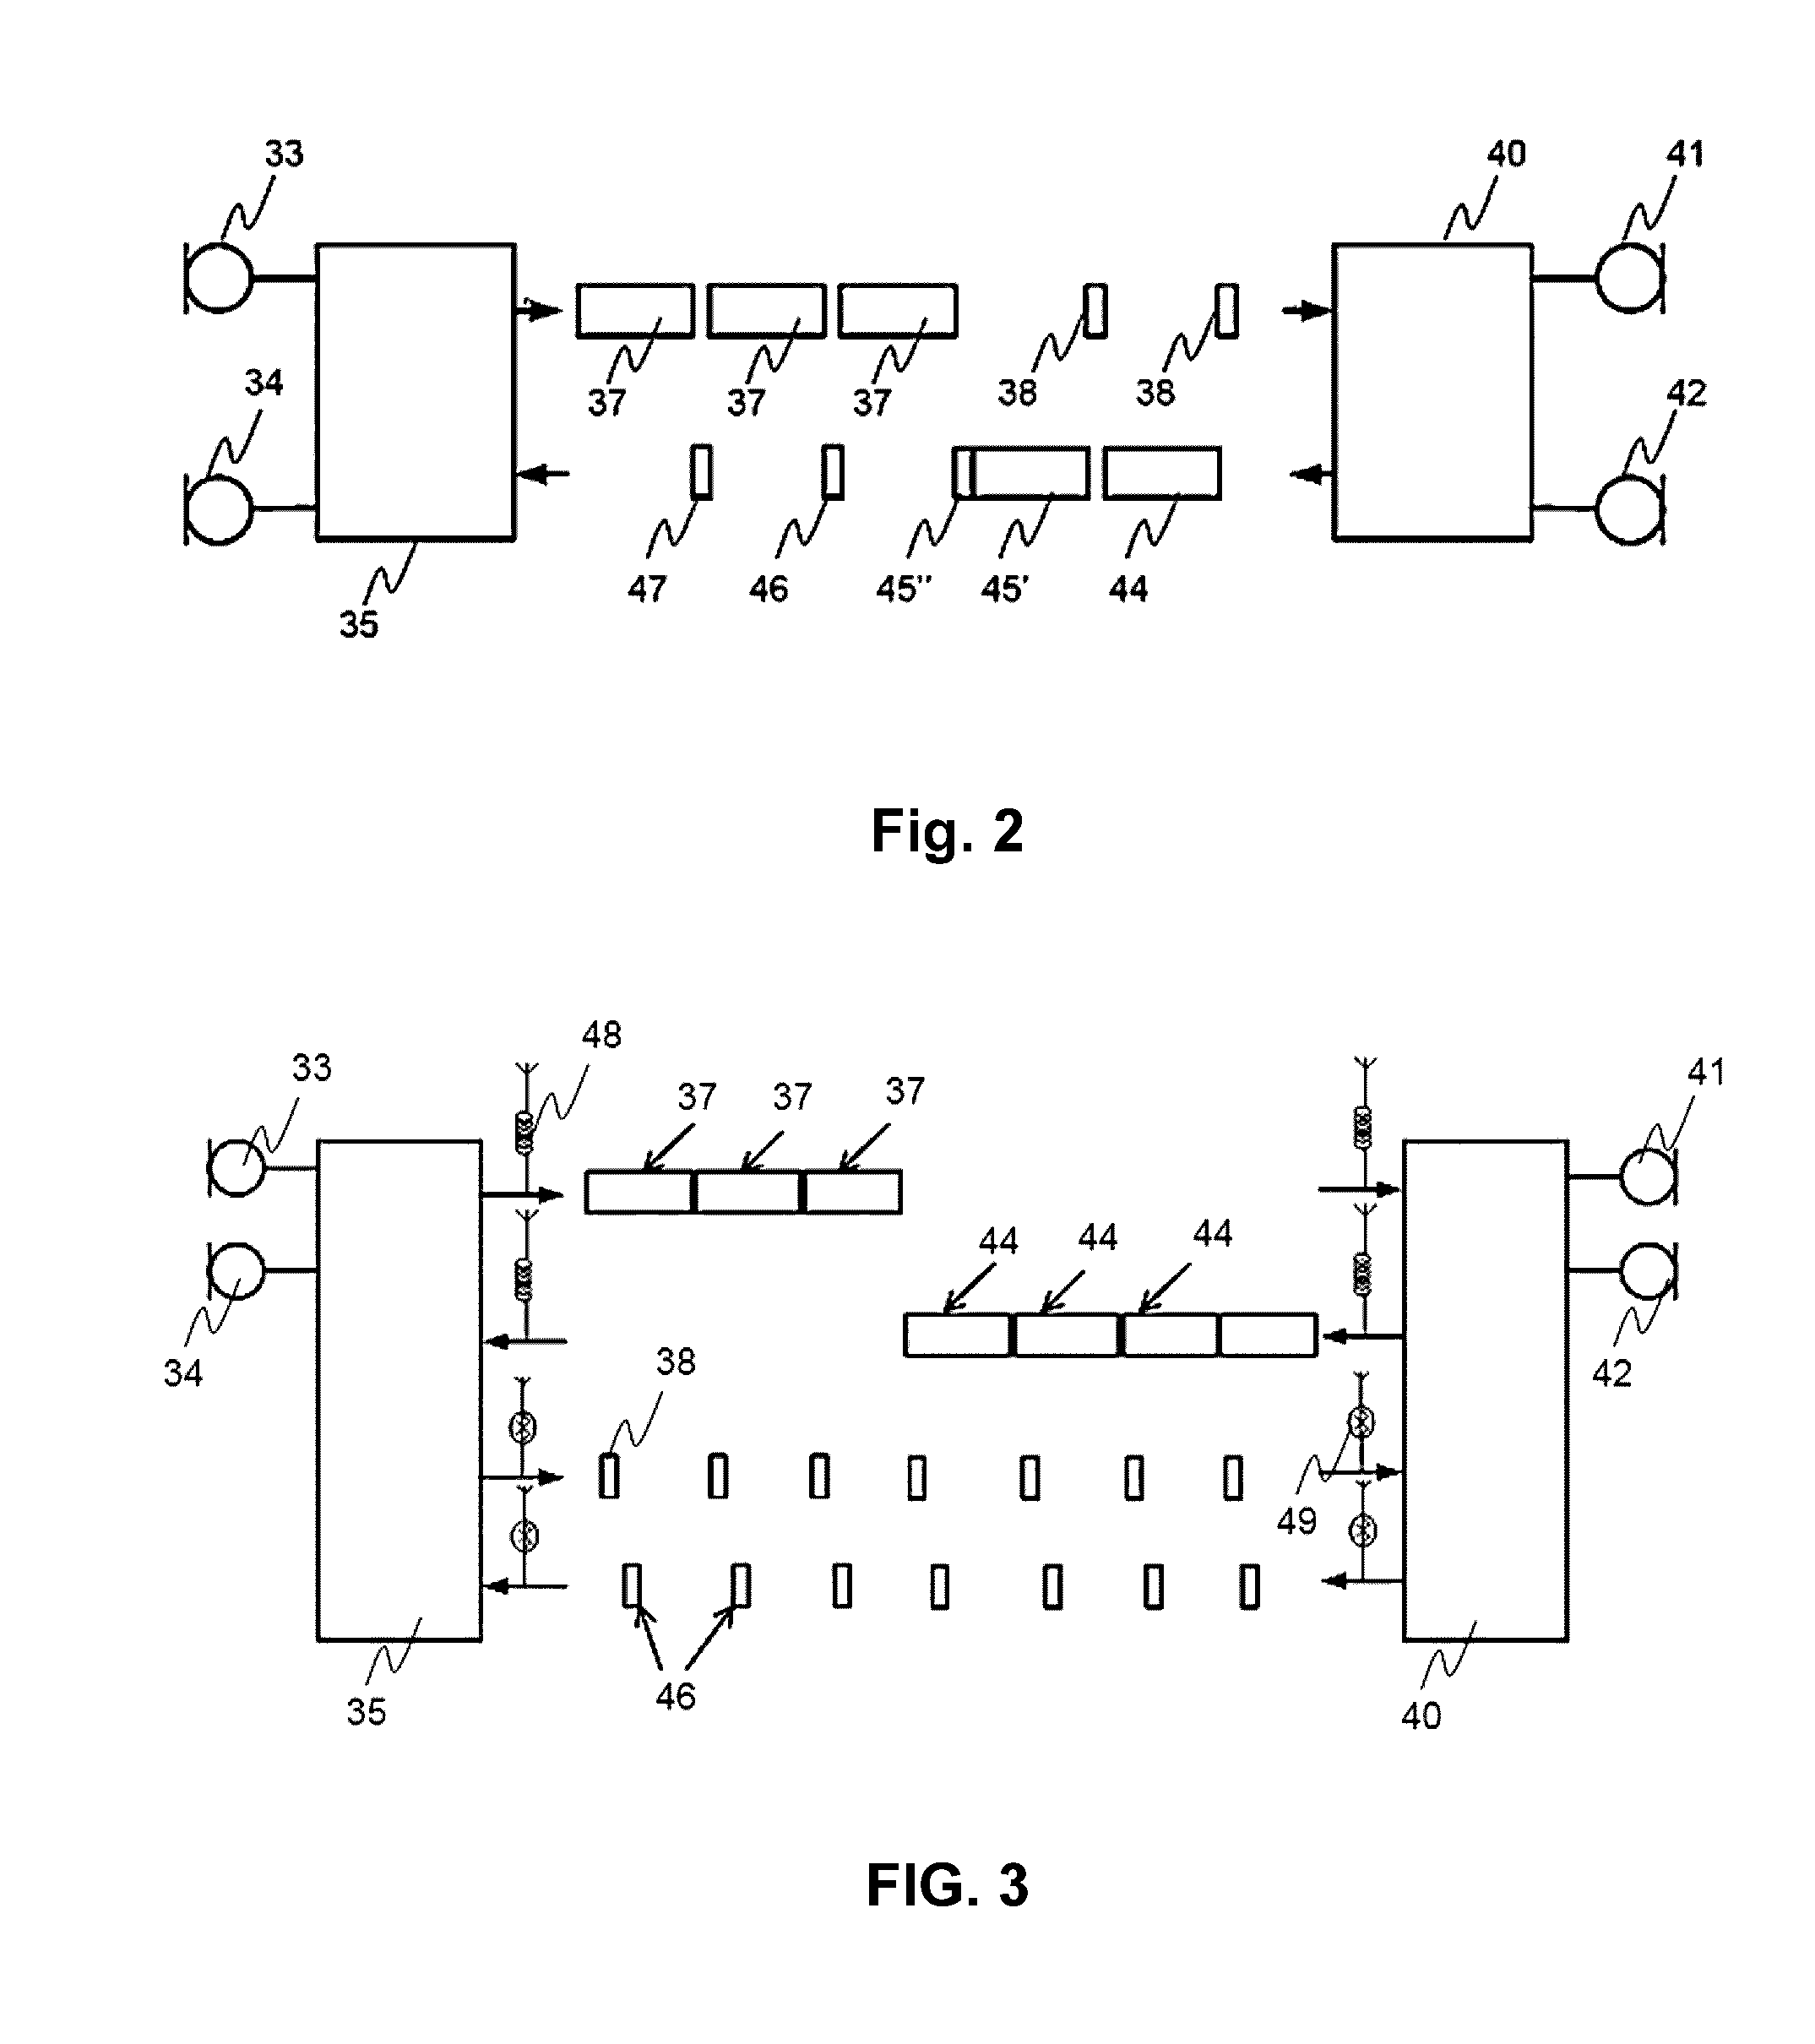 Method for selecting transmission direction in a binaural hearing aid